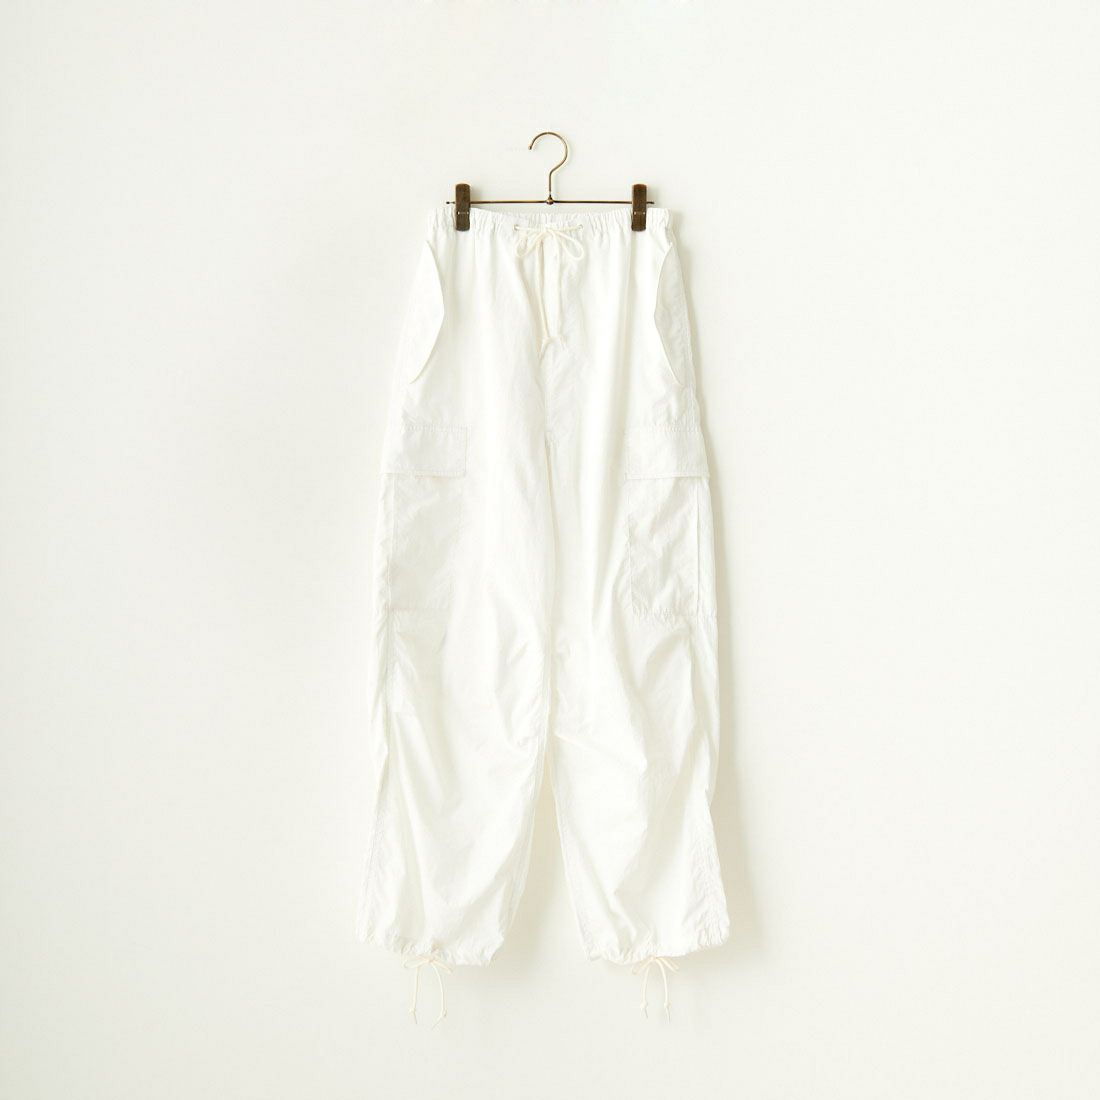 Jeans Factory Clothes [ジーンズファクトリークローズ] ナイロンバルーンカーゴパンツ [IN8-PT-4] WHITE